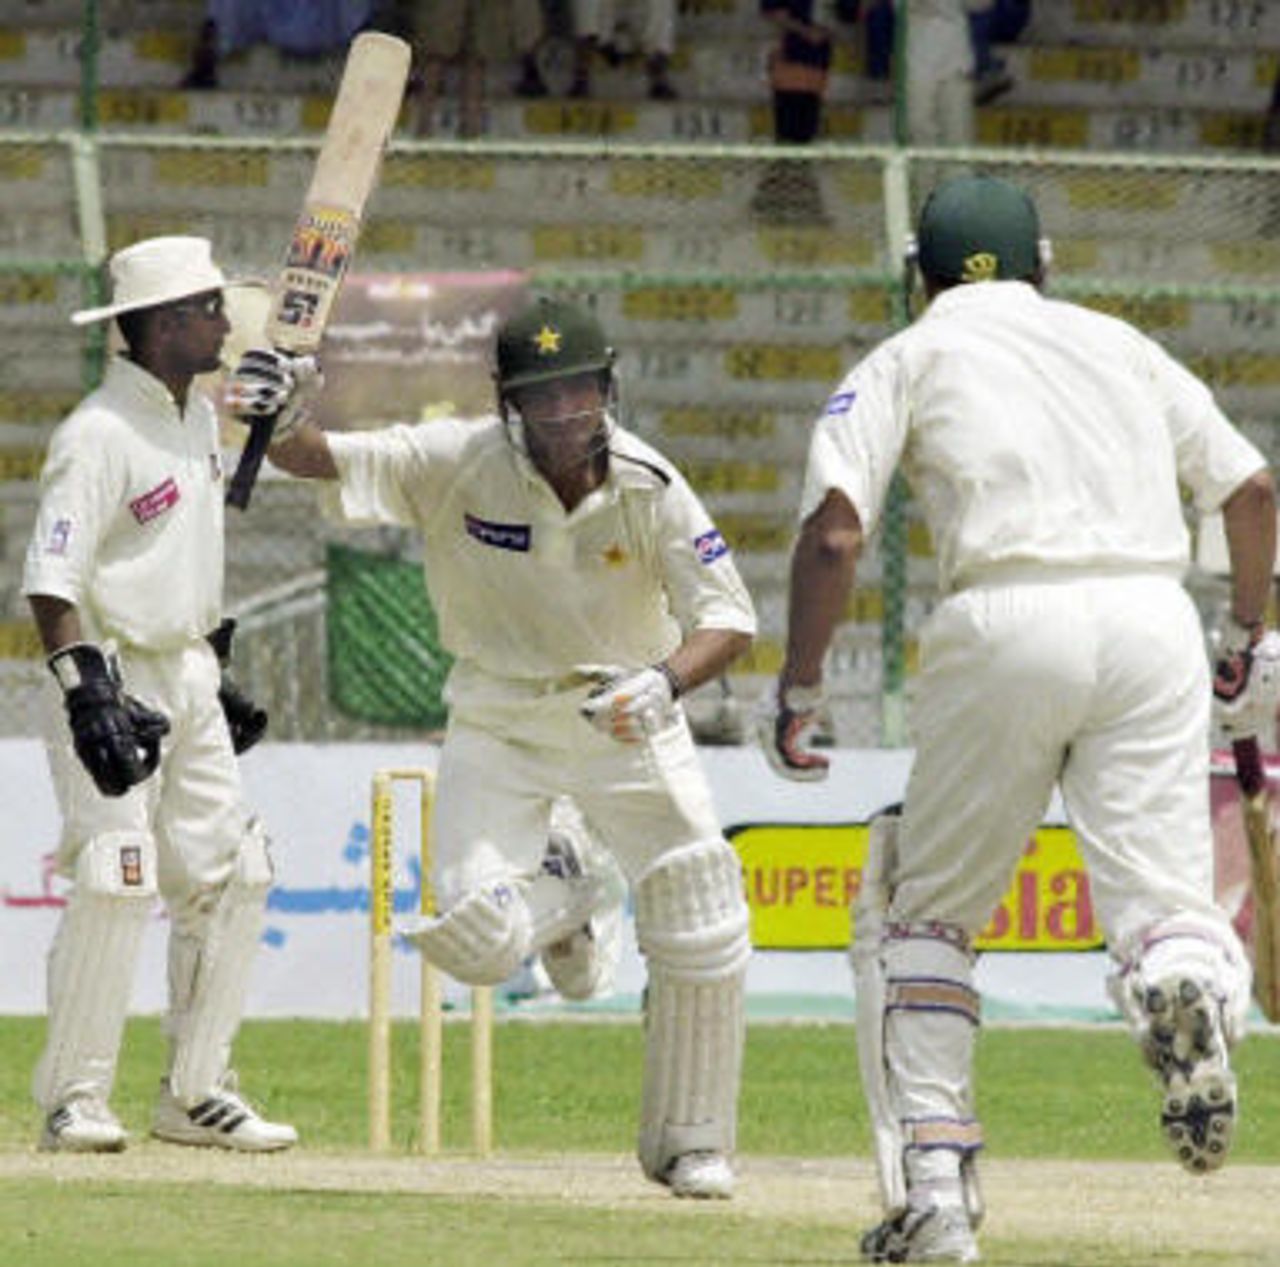 Yasir Hameed (C) raises his bat as he celebrates completing his second century during the first Test match between Pakistan and Bangladesh in Karachi, 24 August 2003. Yasir Hameed became only the second batsman in Test cricket to hit two hundreds in his debut Test.